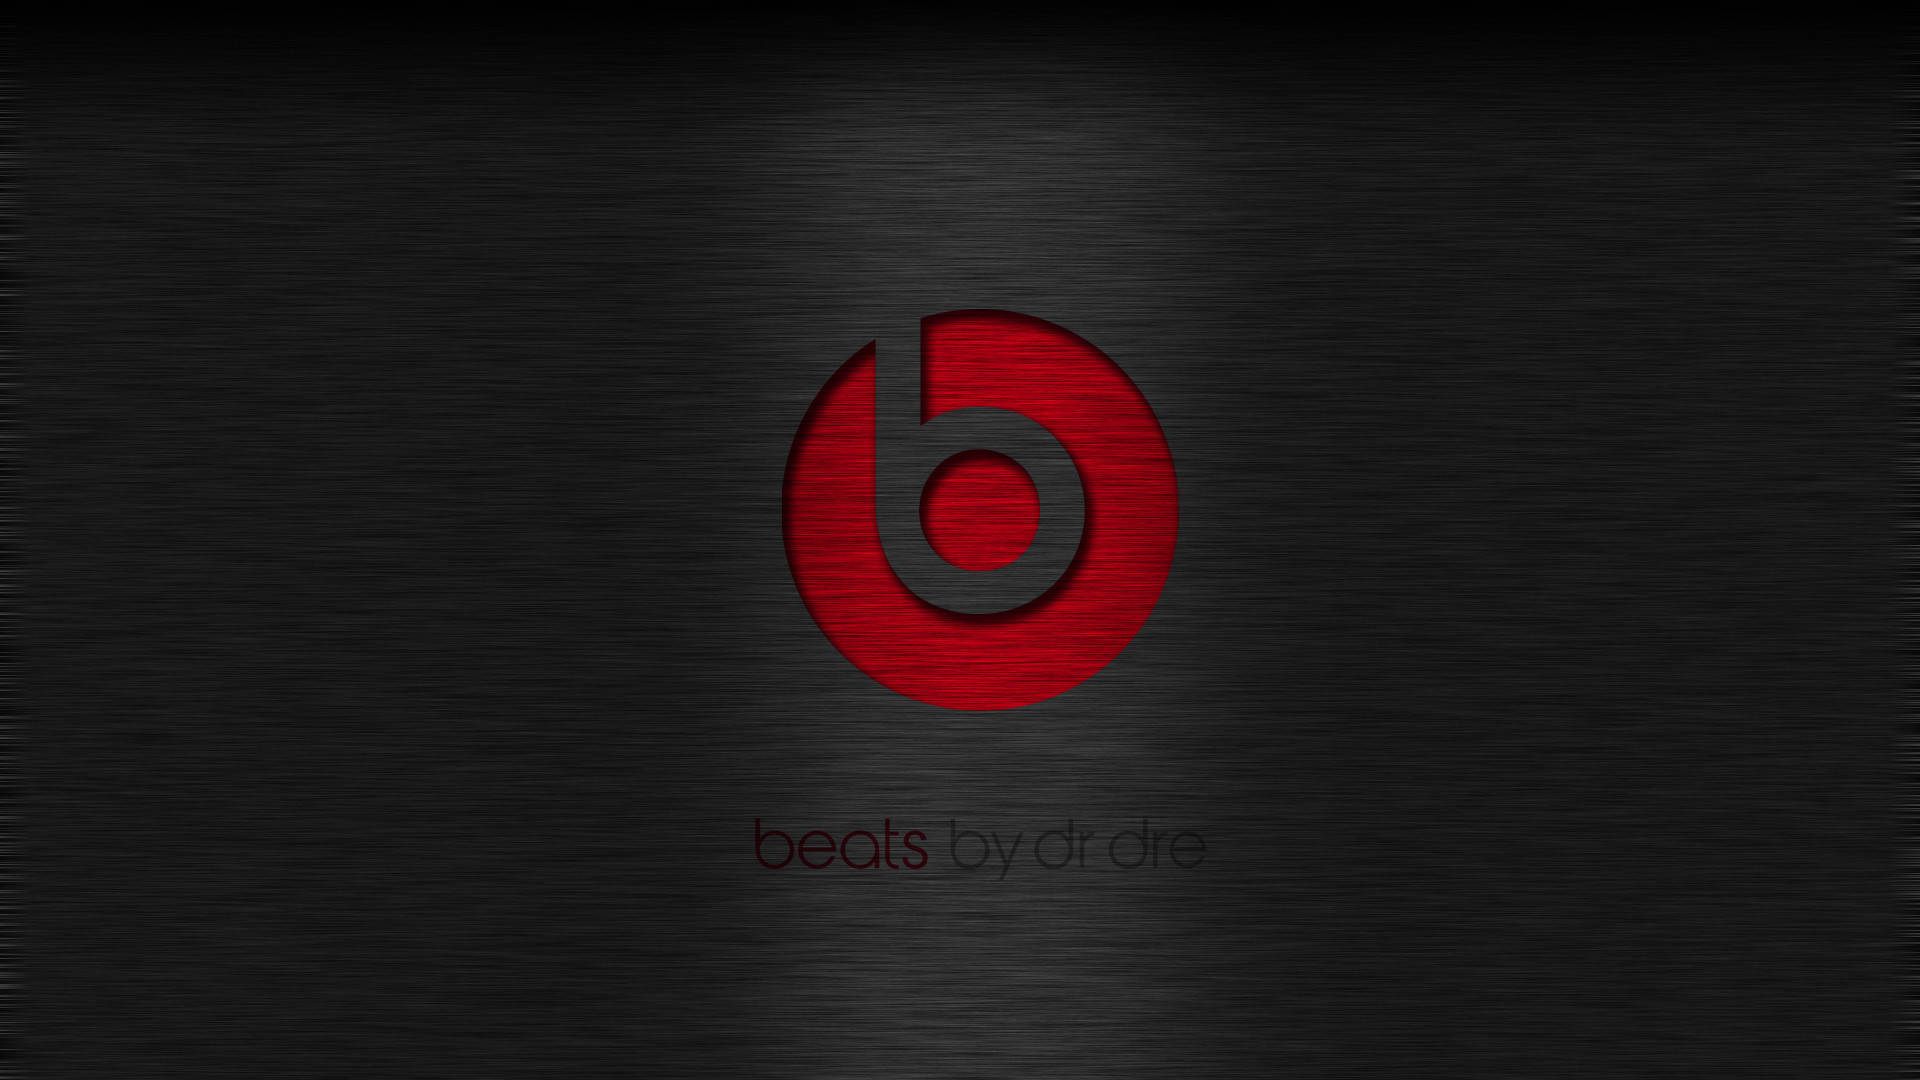 1920x1080 customization wallpaper other simple beats by dr dre wallpaper .